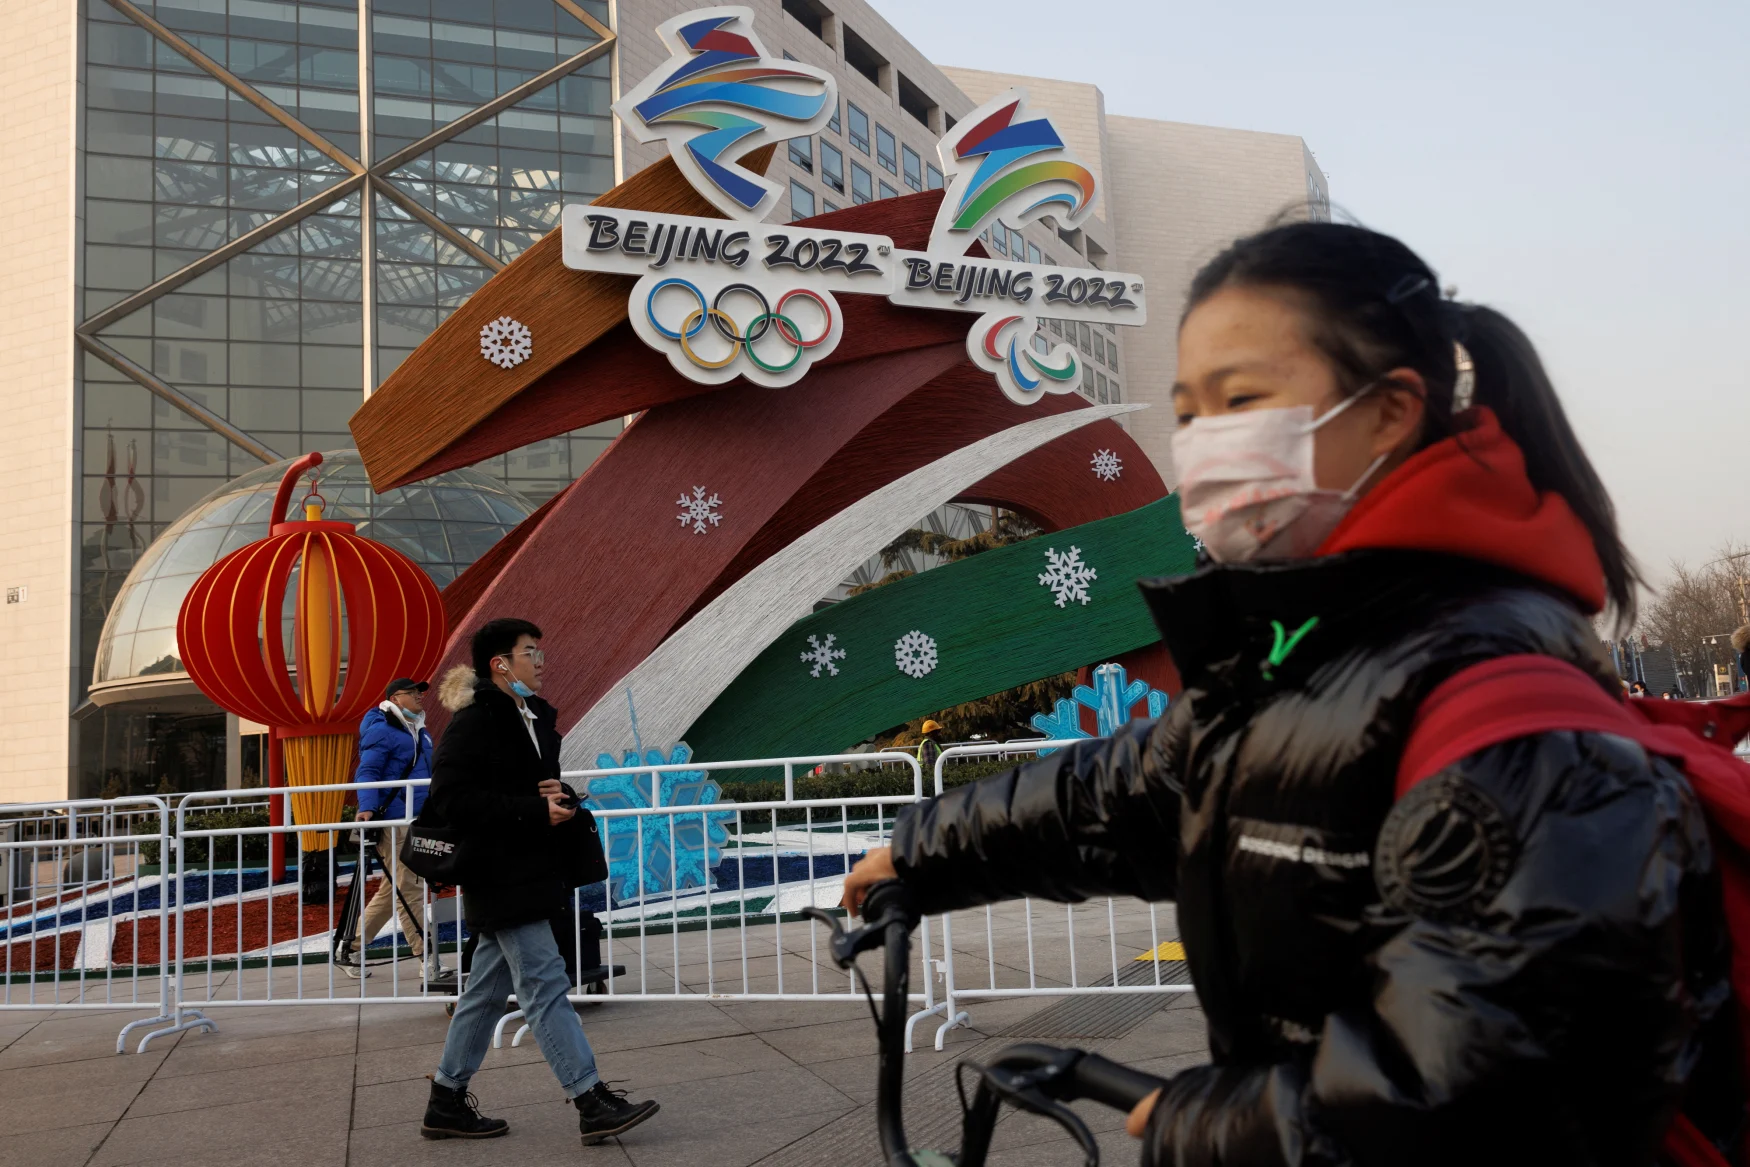 People walk past a display of the logos of the Beijing 2022 Winter Olympics and Paralympics in Beijing, China, January 14, 2022. REUTERS/Thomas Peter